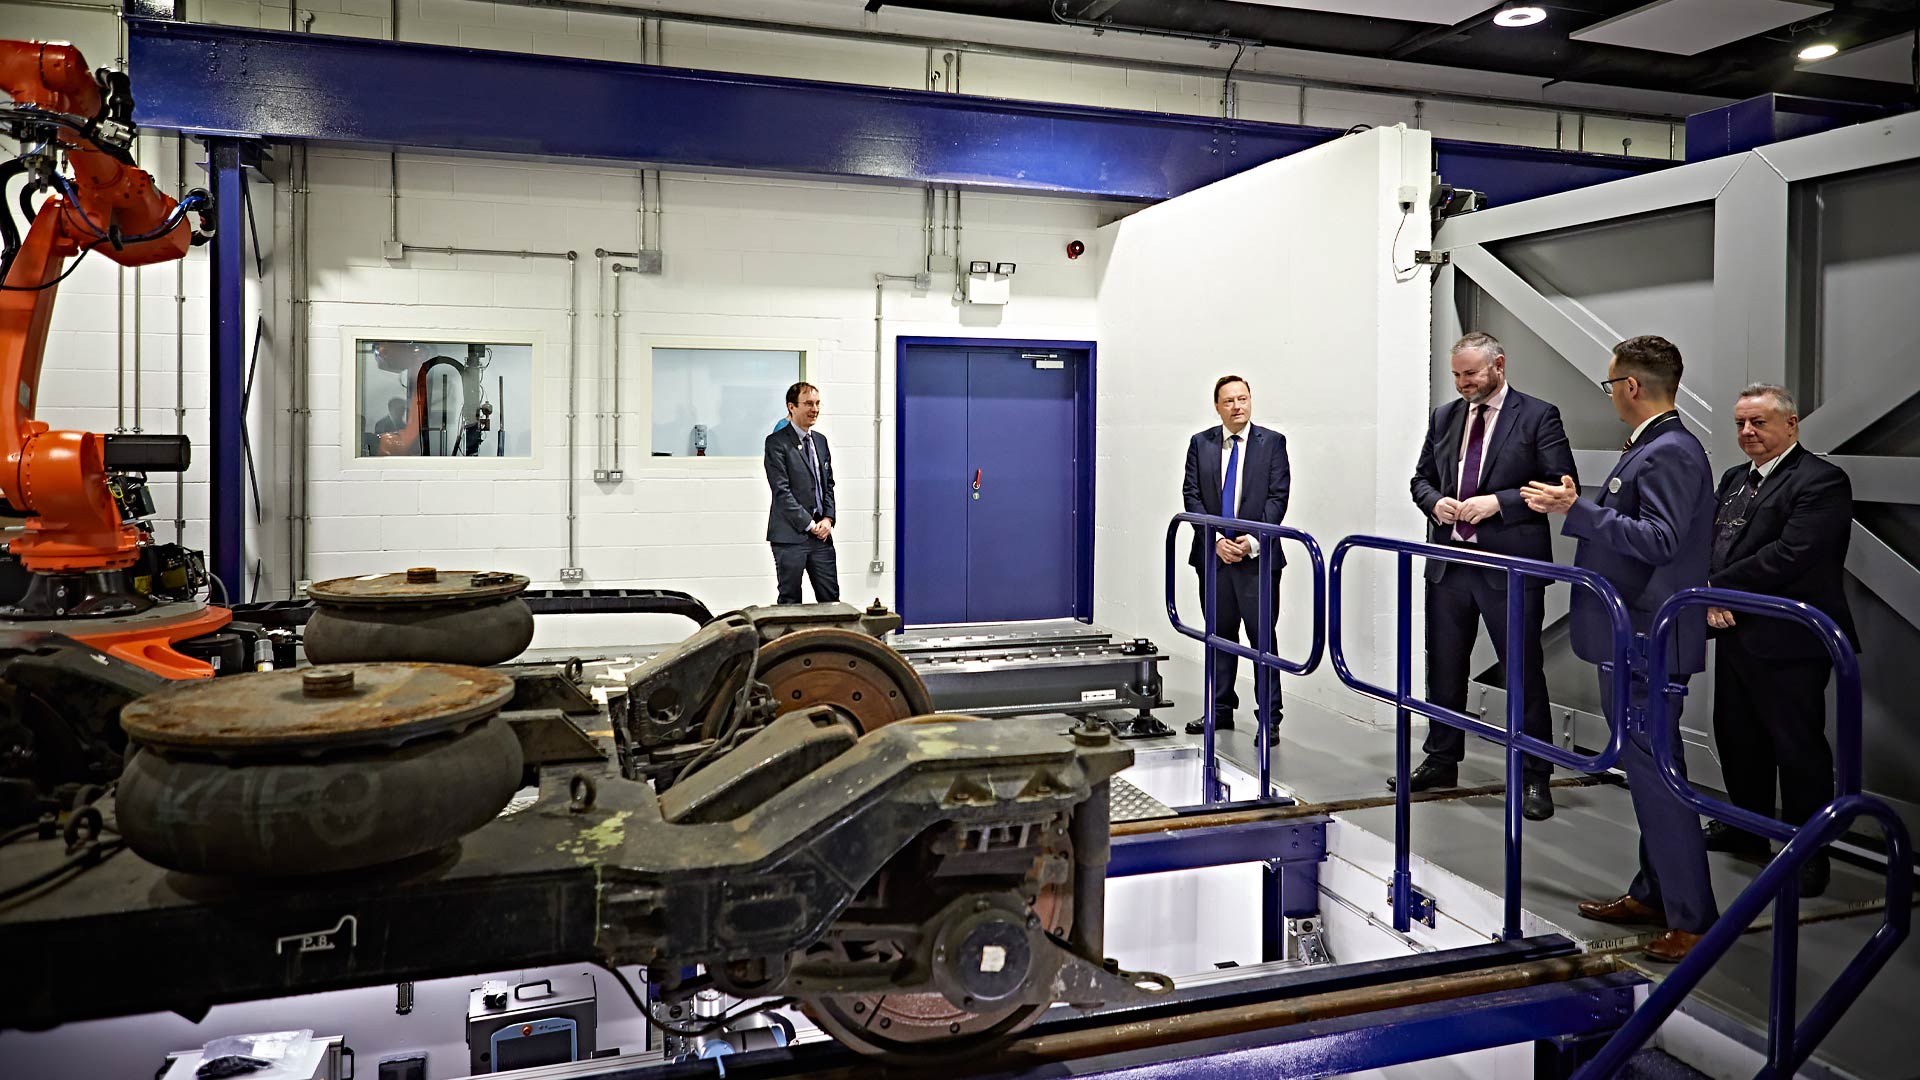 Andrew Stephenson MP during his tour of the new facilities within the IRR's Centre of Excellence in Rolling Stock